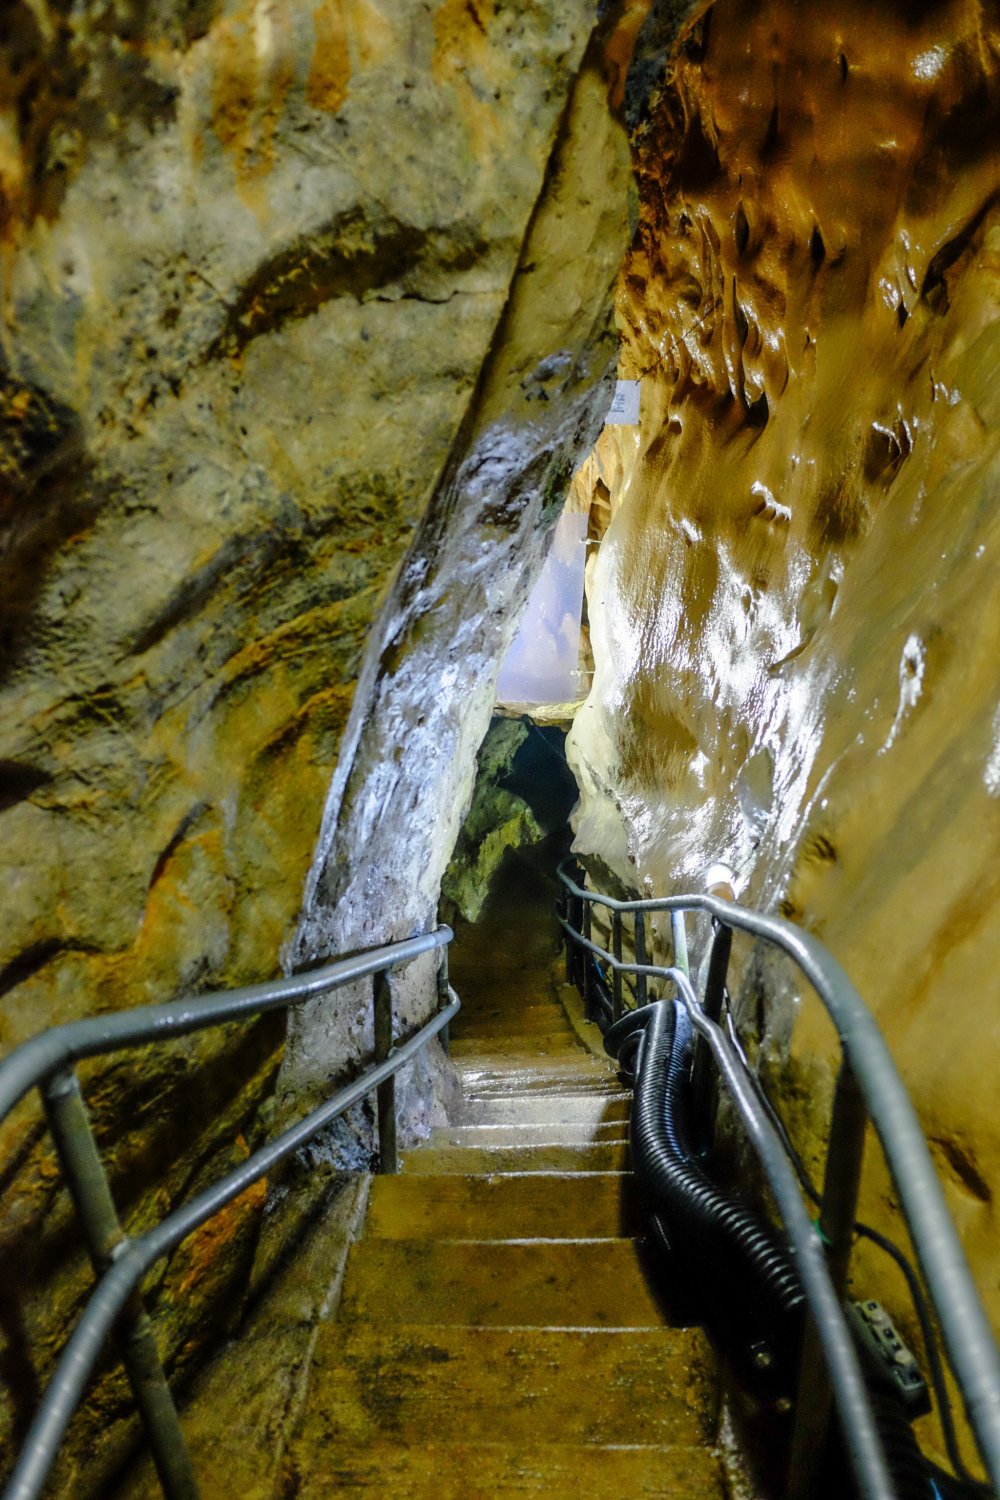 The cave features narrow walkways with low overhead clearance, giving it a nice and rustic feeling